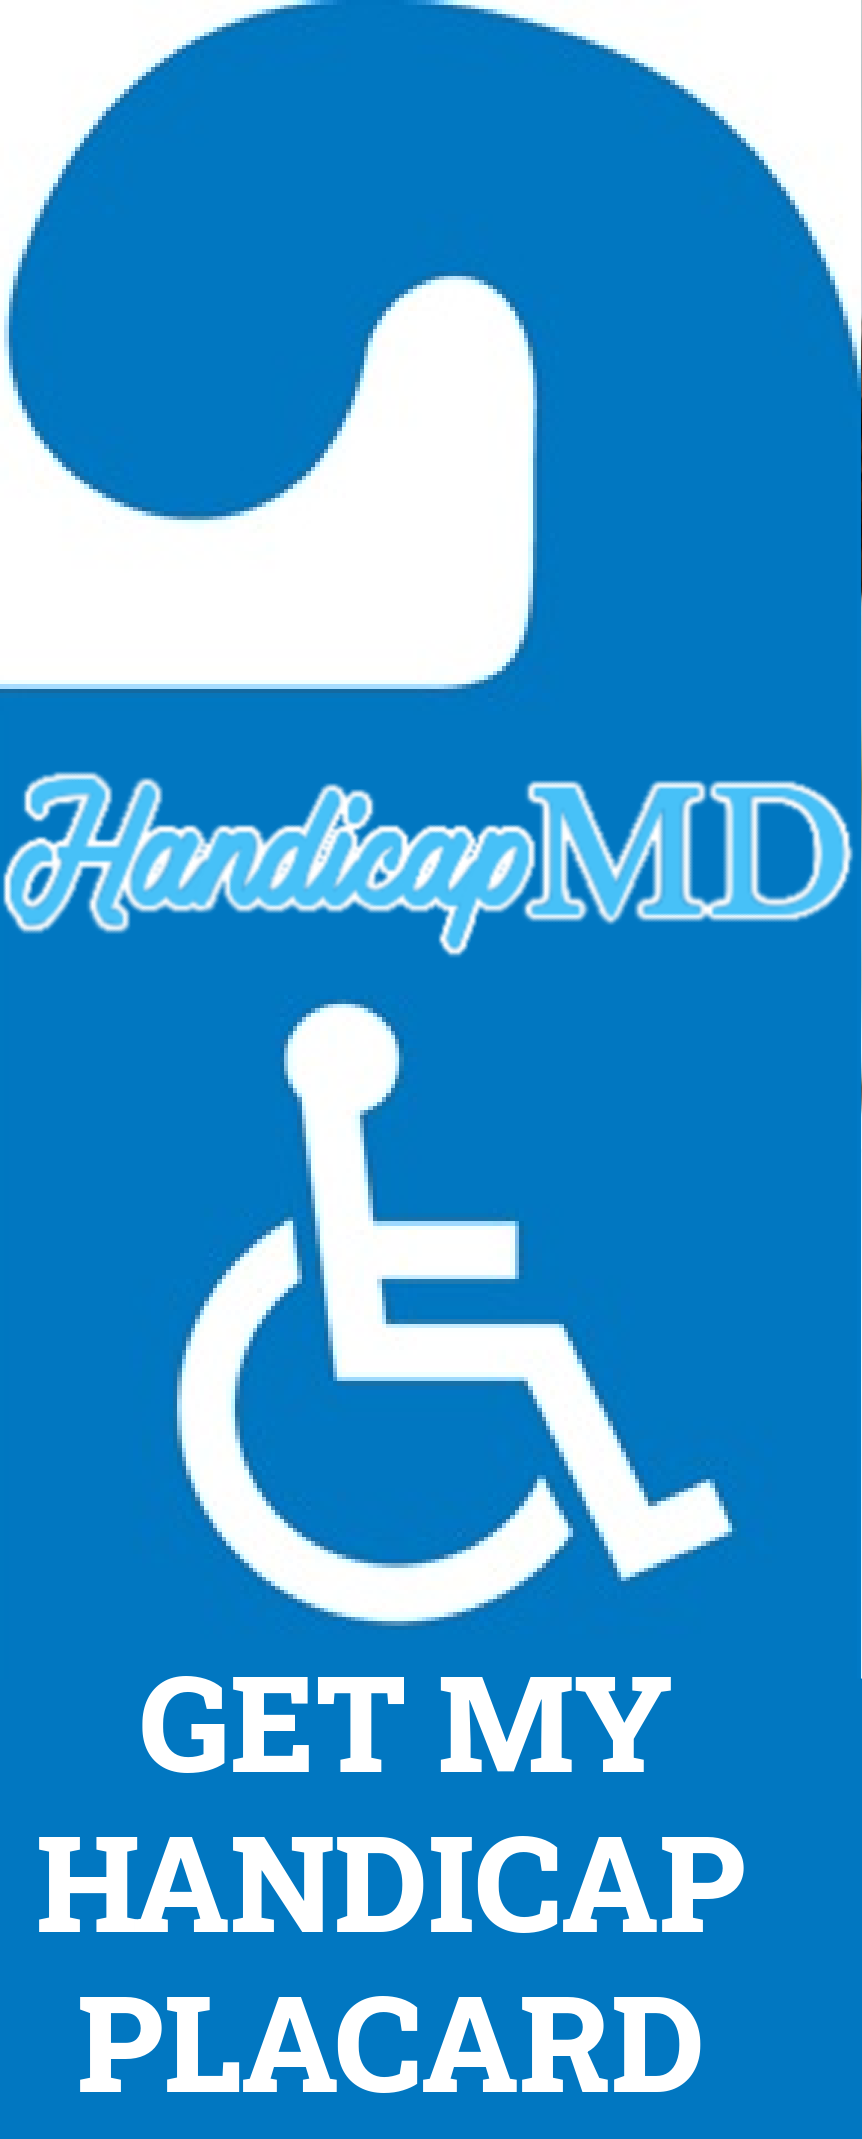 Cardiovascular Conditions and DMV Handicap Parking Permits